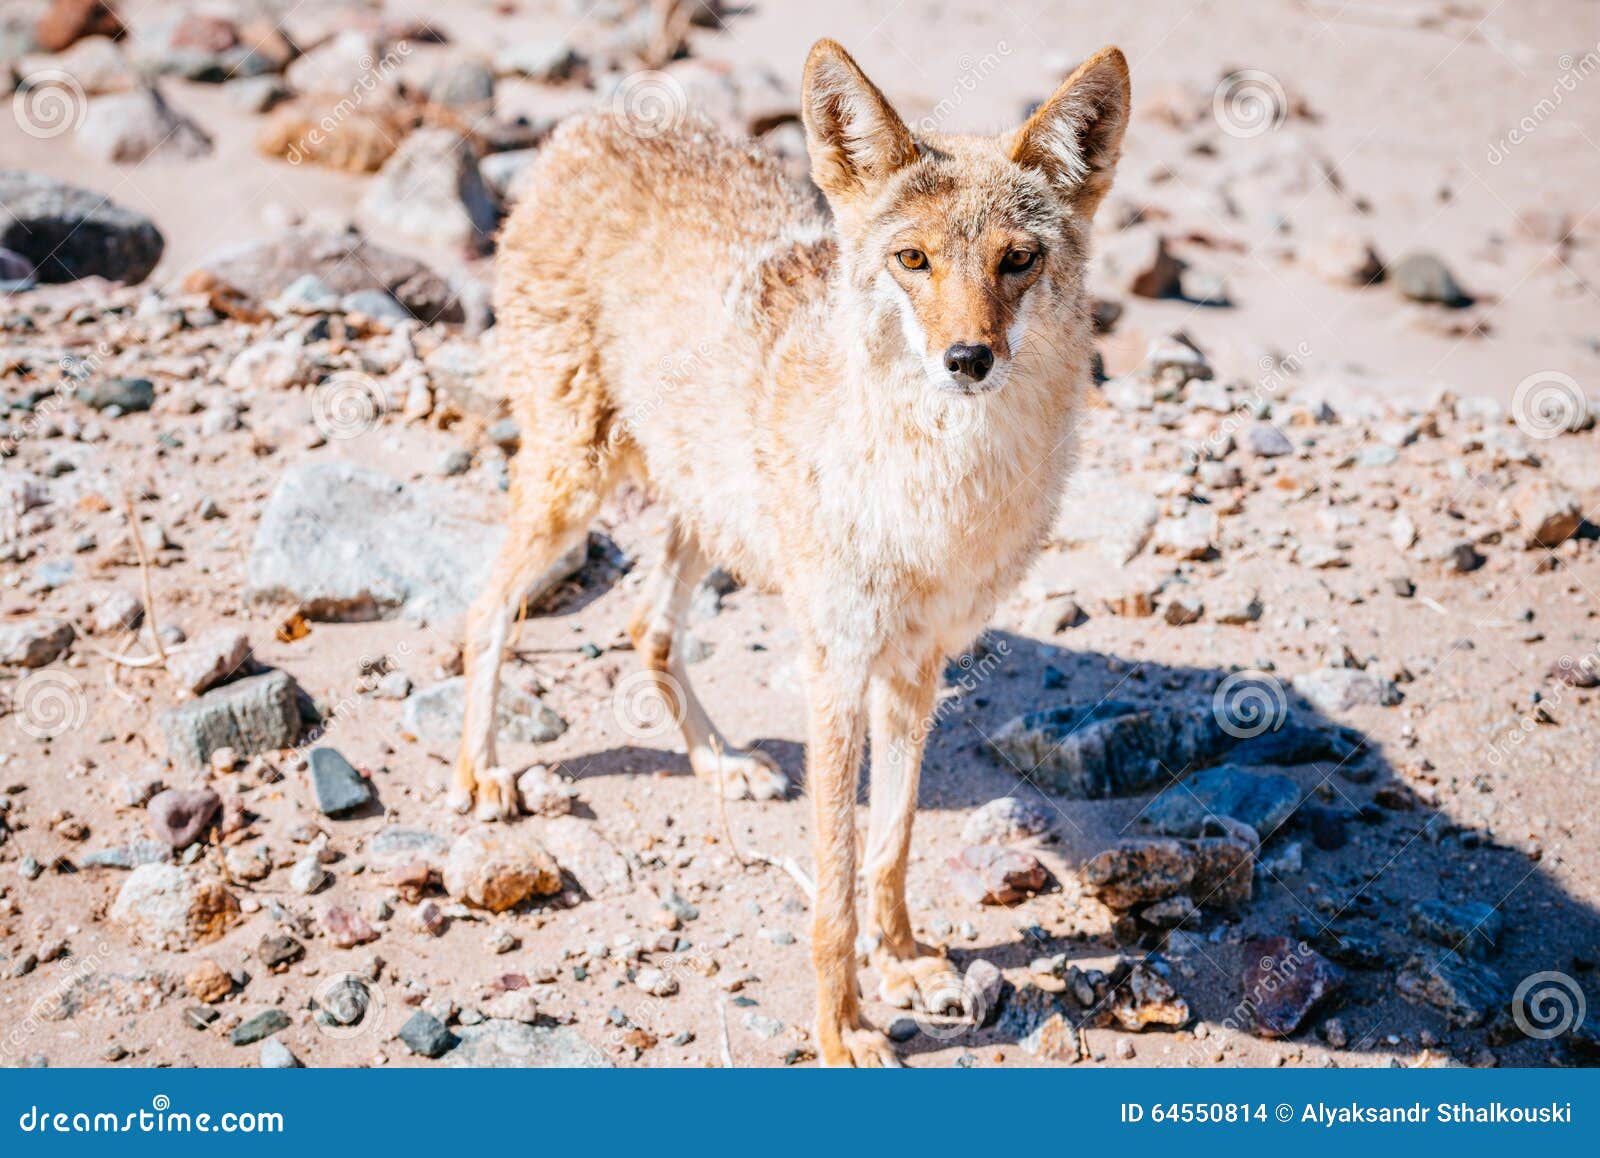 coyote (canis latrans) in death valley